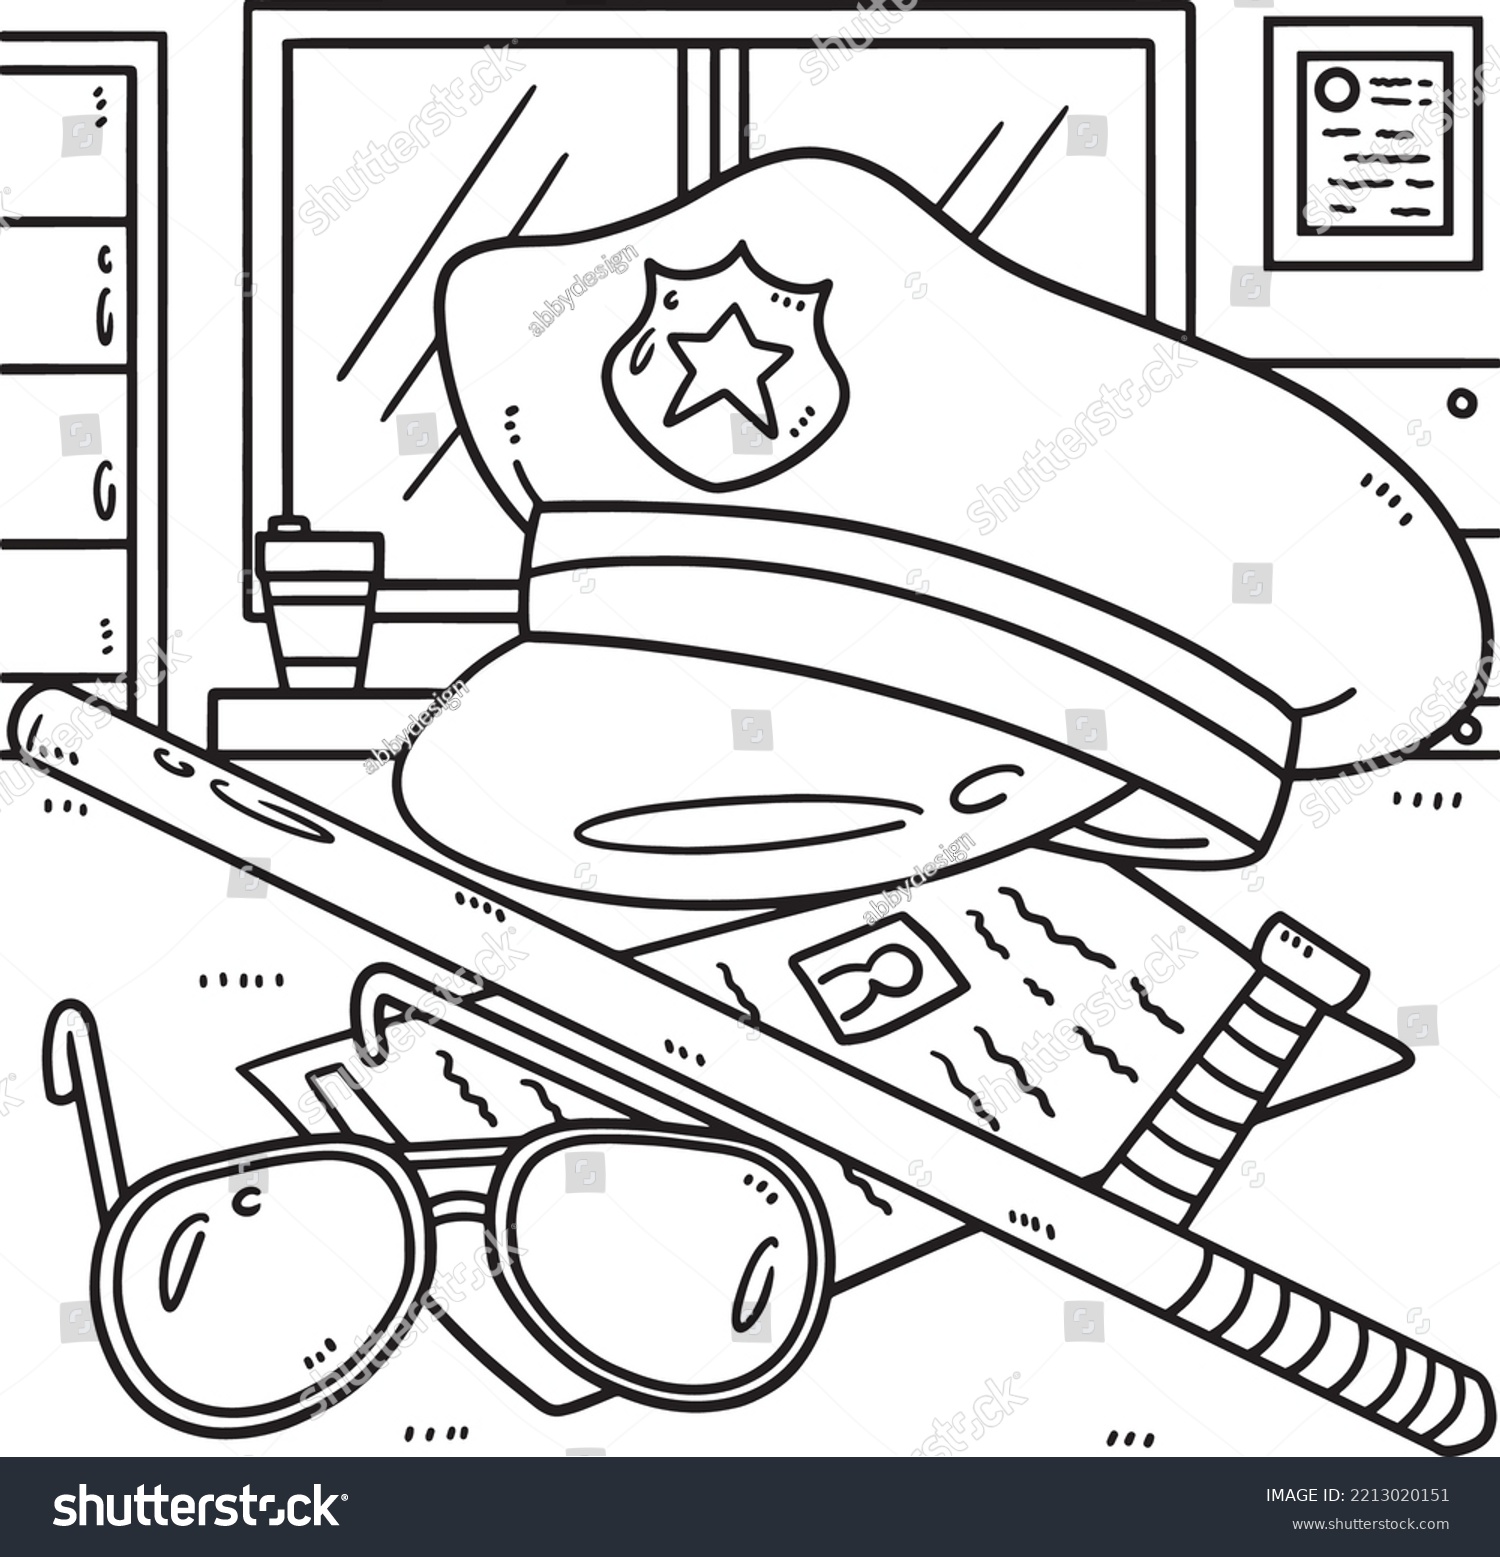 Policeman coloring page images stock photos d objects vectors